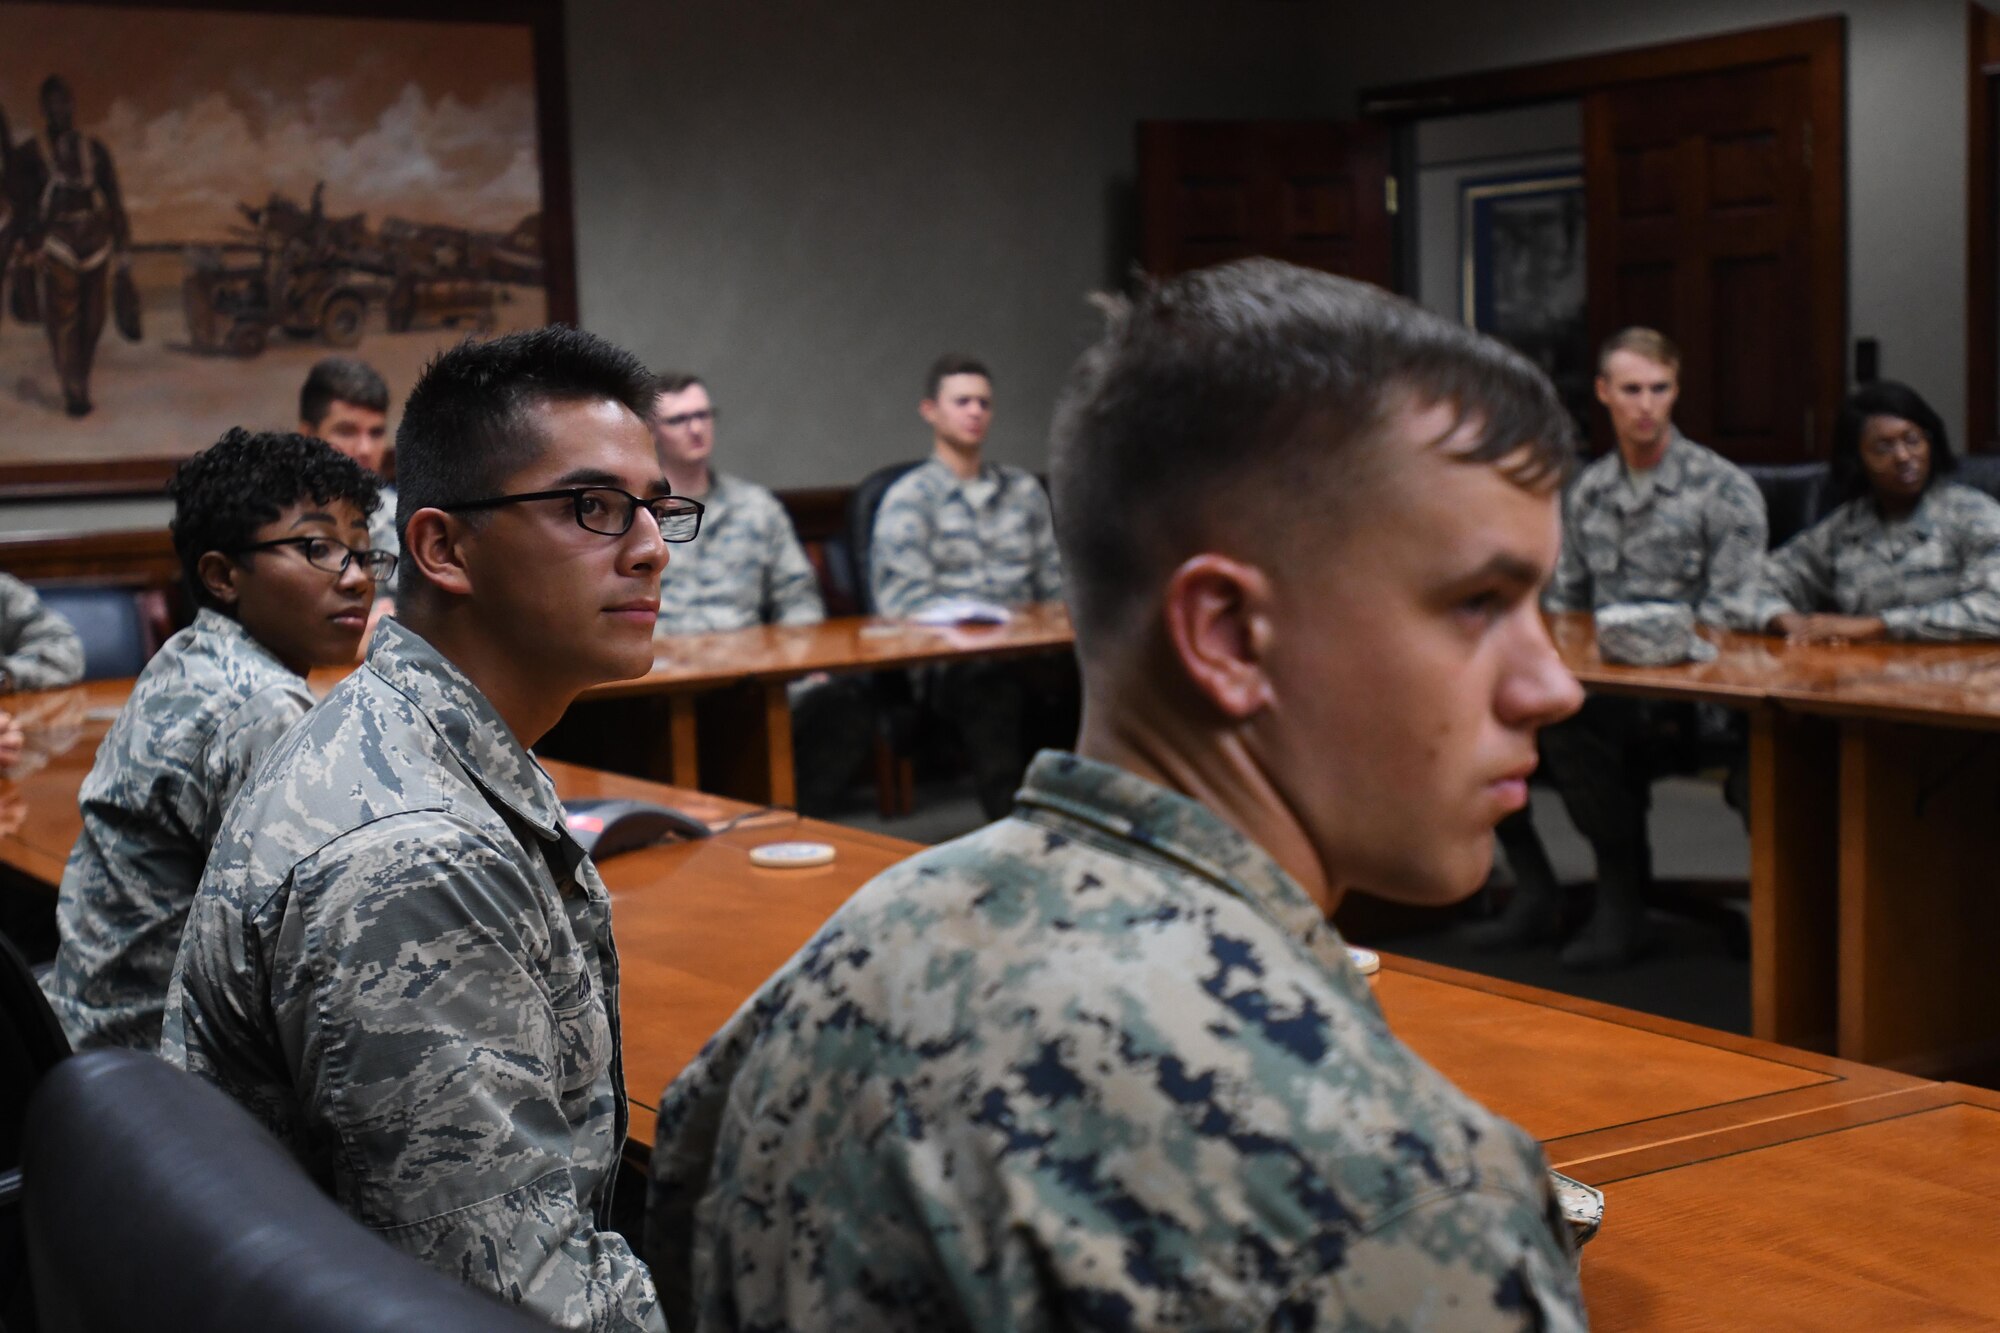 335th Training Squadron weather students attend a video teleconference with Lt. Gen. Richard Clark, 3rd Air Force commander, Ramstein Air Base, Germany, at Stennis Hall Oct. 12, 2017, on Keesler Air Force Base, Mississippi. Airmen delivered a mission and regional weather forecast to Clark as a training demonstration as well as a mentorship opportunity. (U.S. Air Force photo by Kemberly Groue)